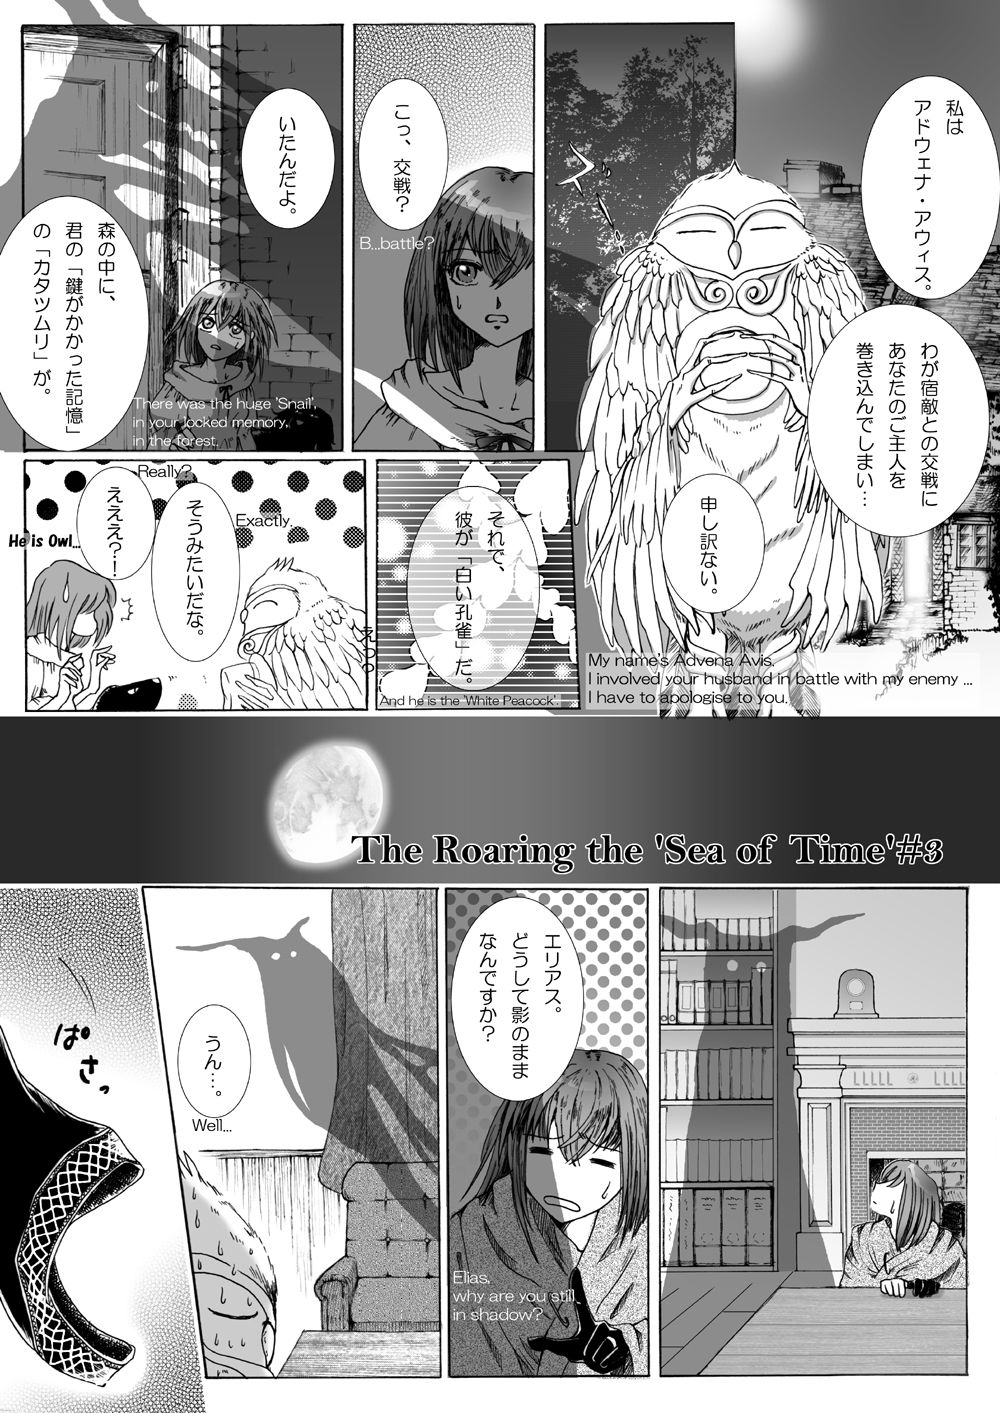 [momo] The Roaring of the 'Sea of Time' (魔法使いの嫁) [英語、日本語]